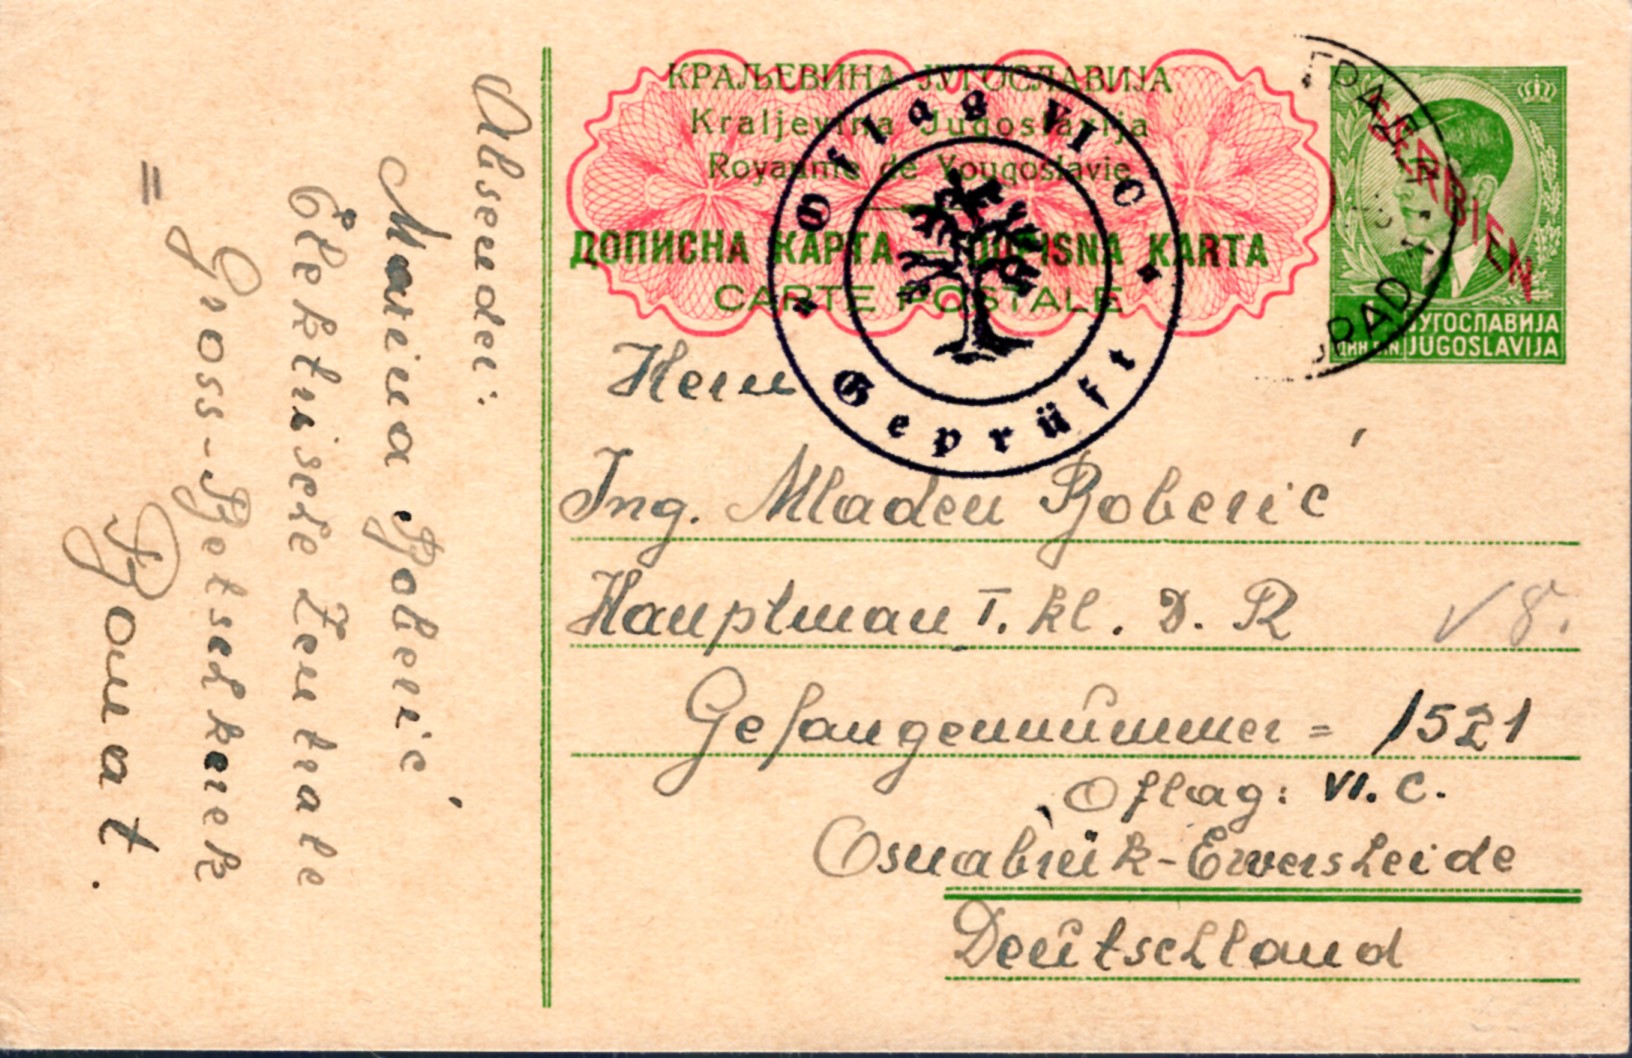 Postal Stationery from the German Occupation of Serbia